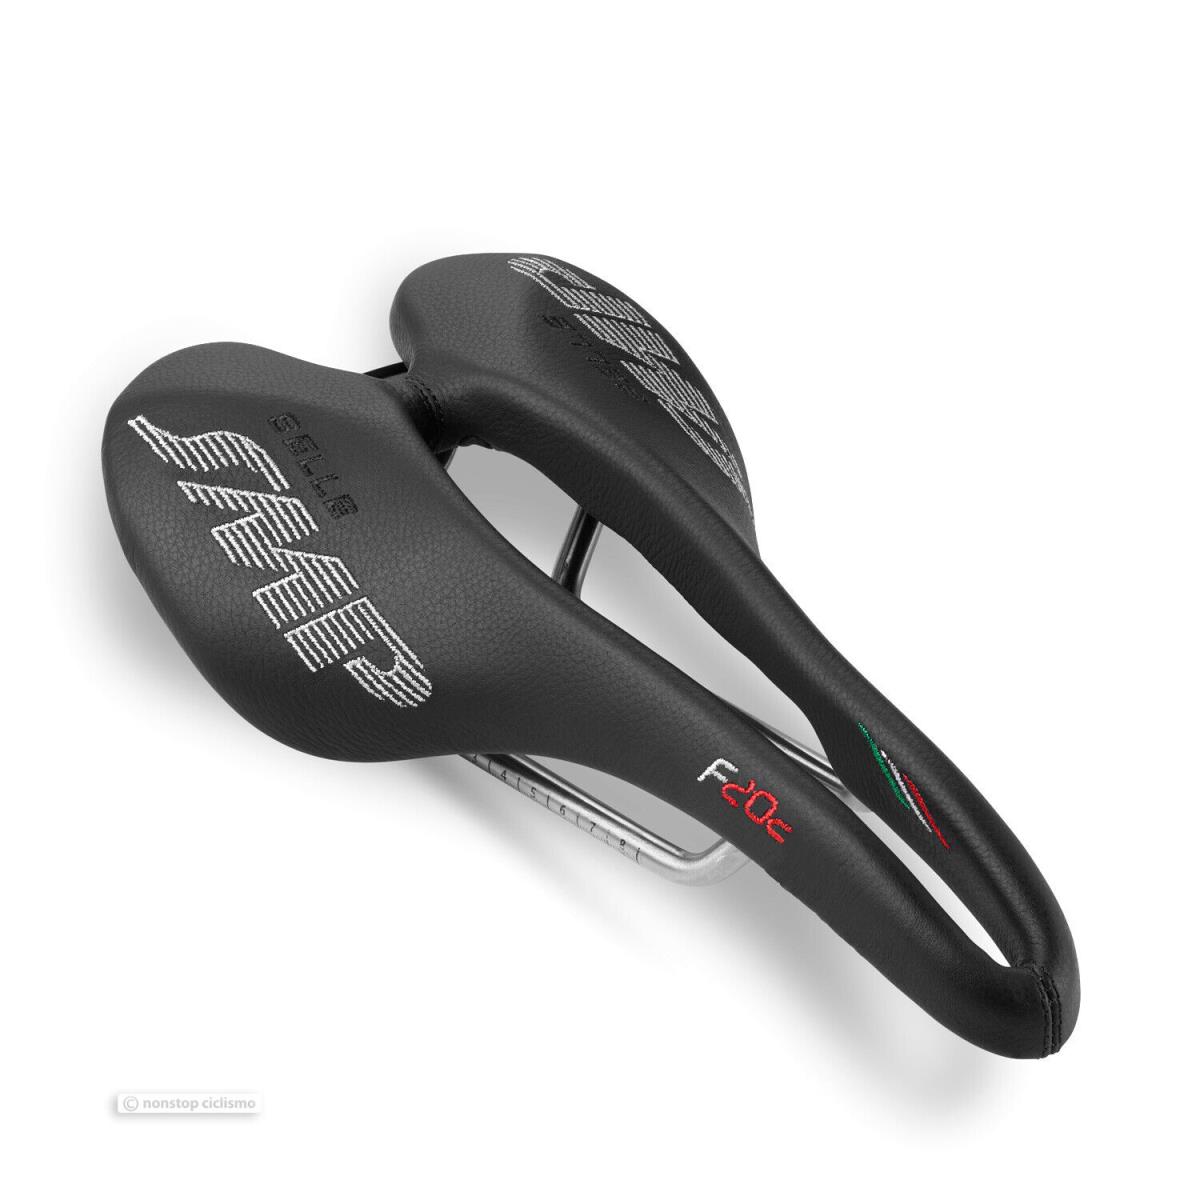 Selle Smp F20C Saddle : Black - Made IN Italy